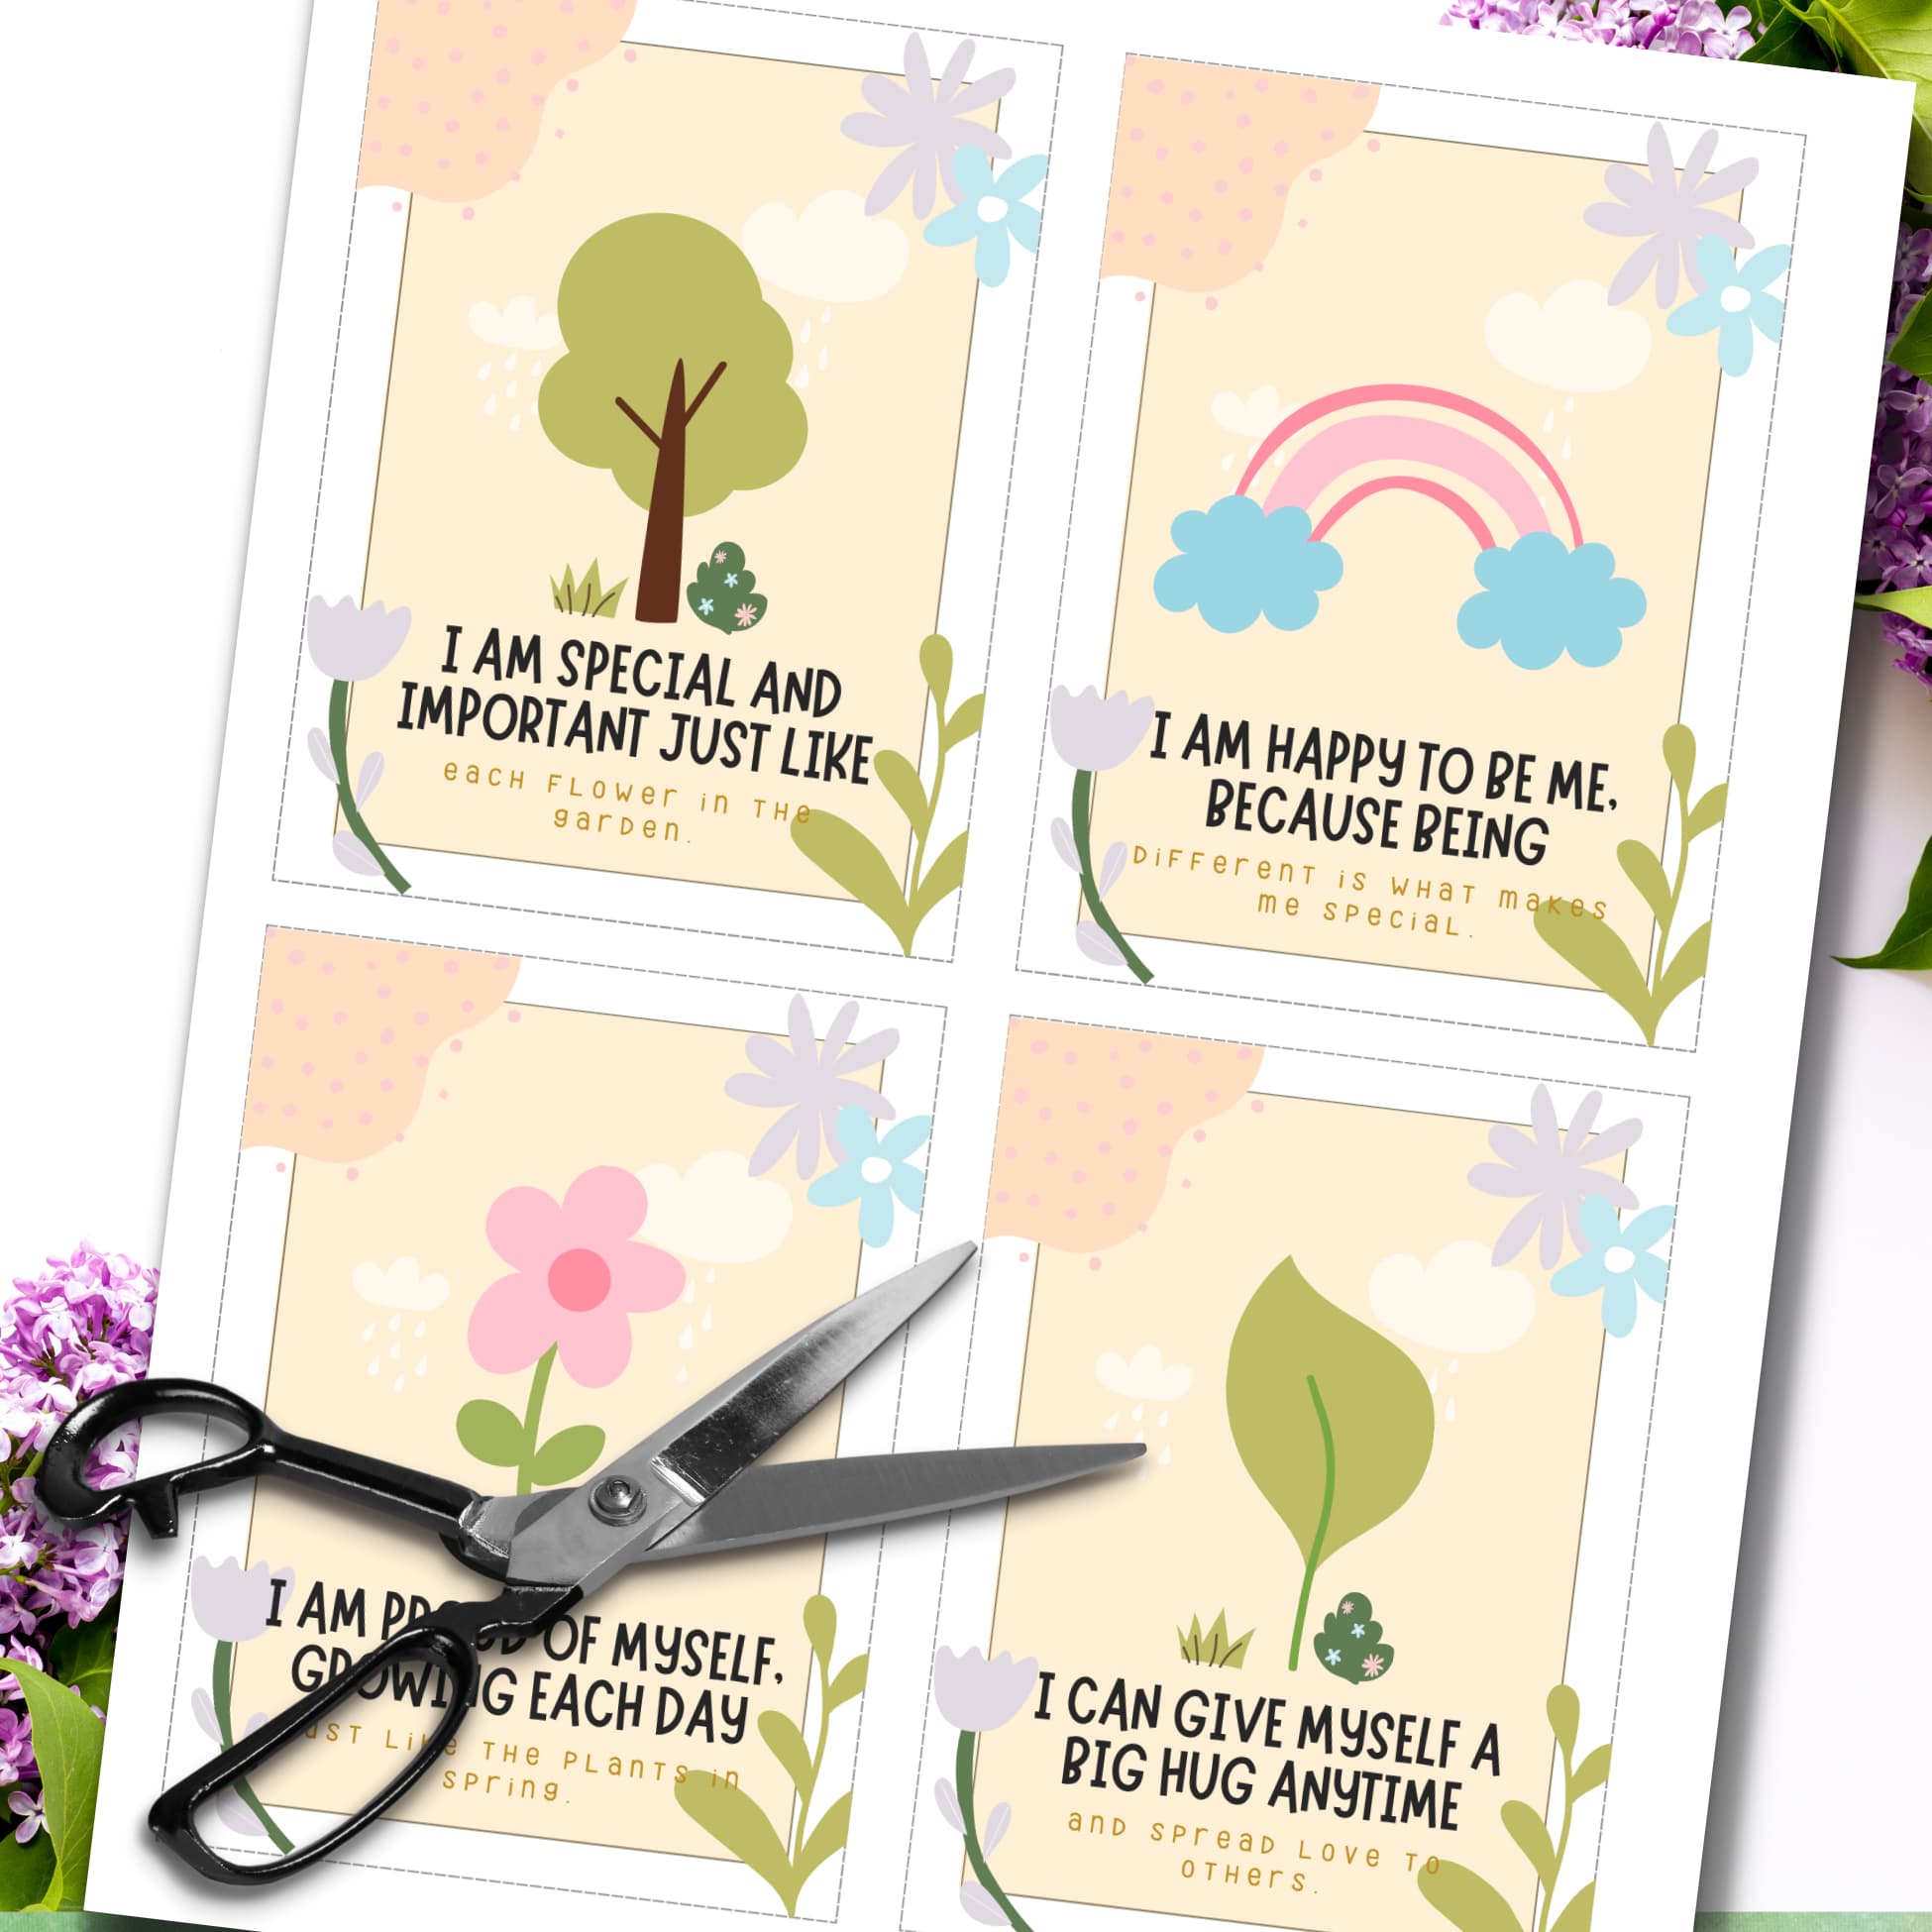 Spring-themed Affirmations